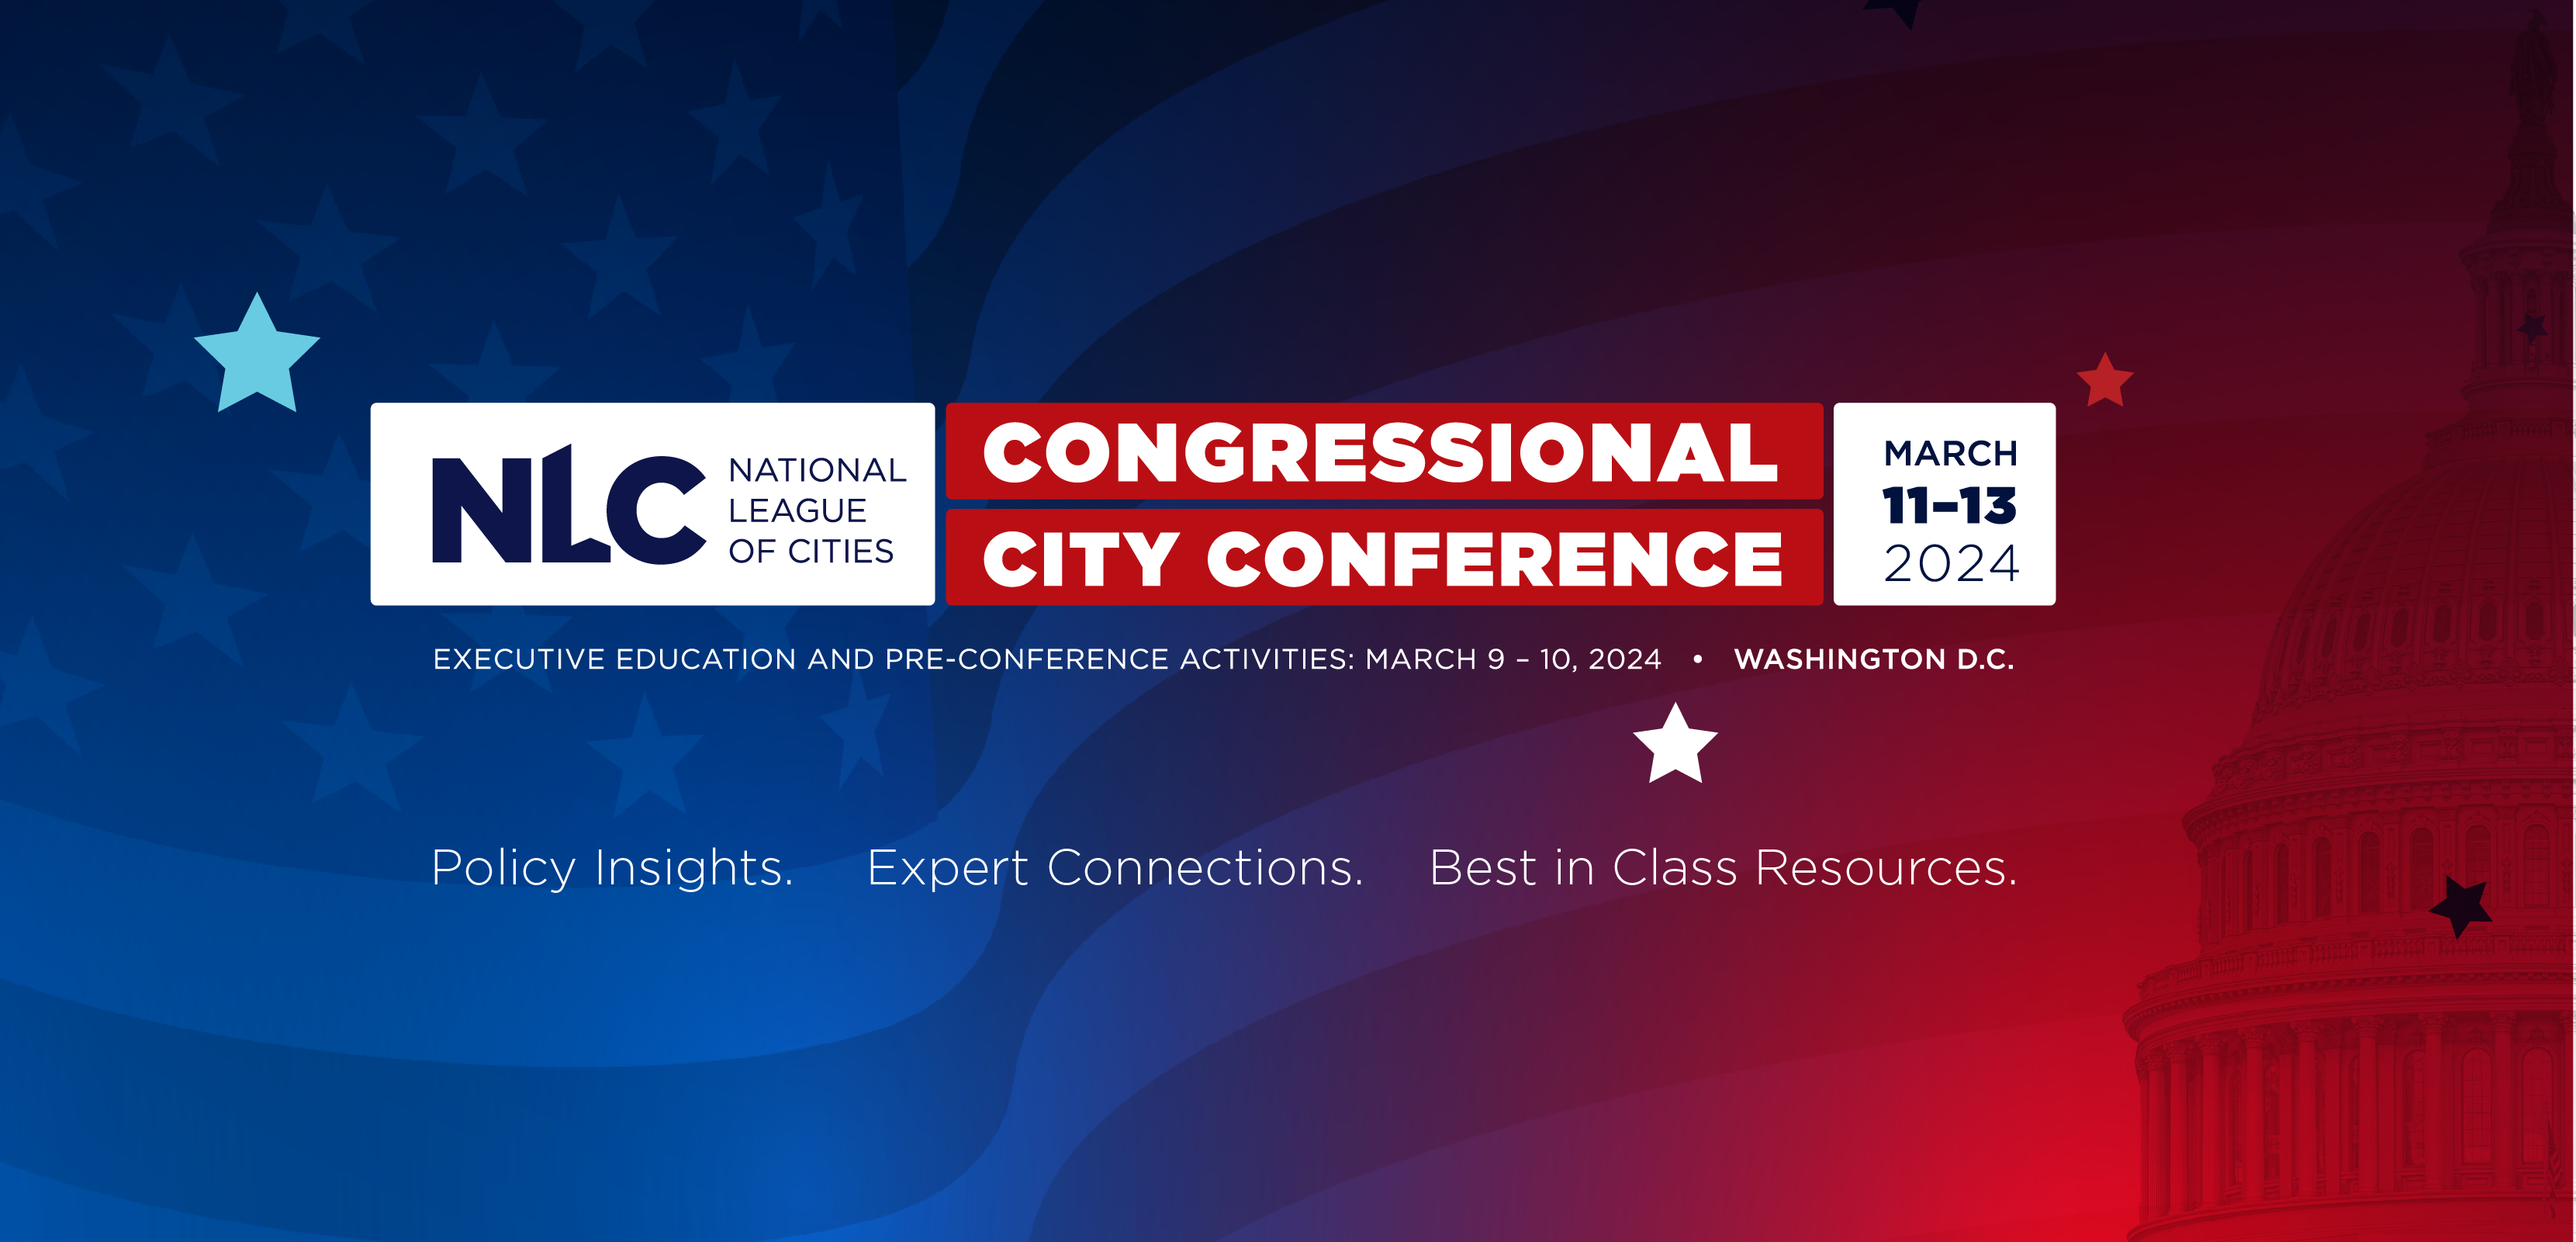 Register Now March 1113, 2024 NLC Congressional City Conference